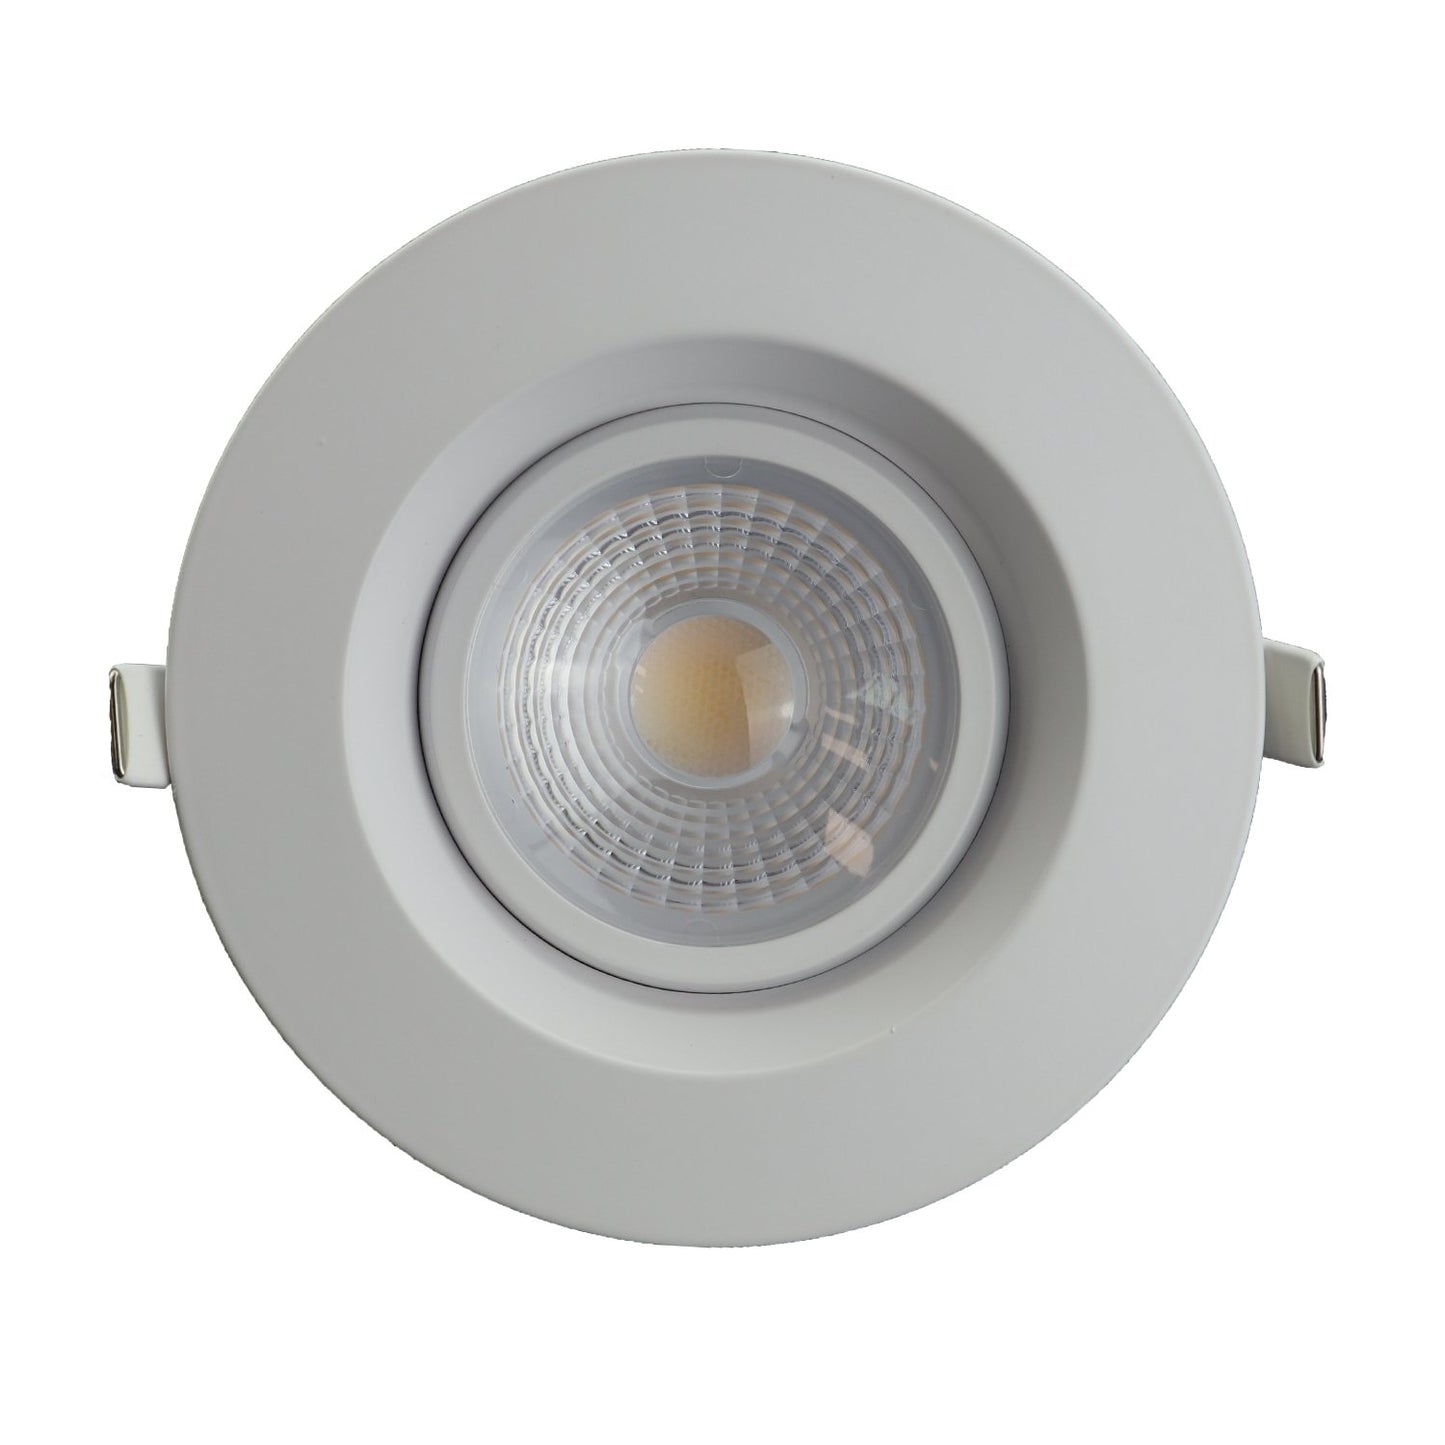 GDL-G20091Goodlite G-20091 4” 14W LED Regress Luminaire Gimbal Round Selectable CCT